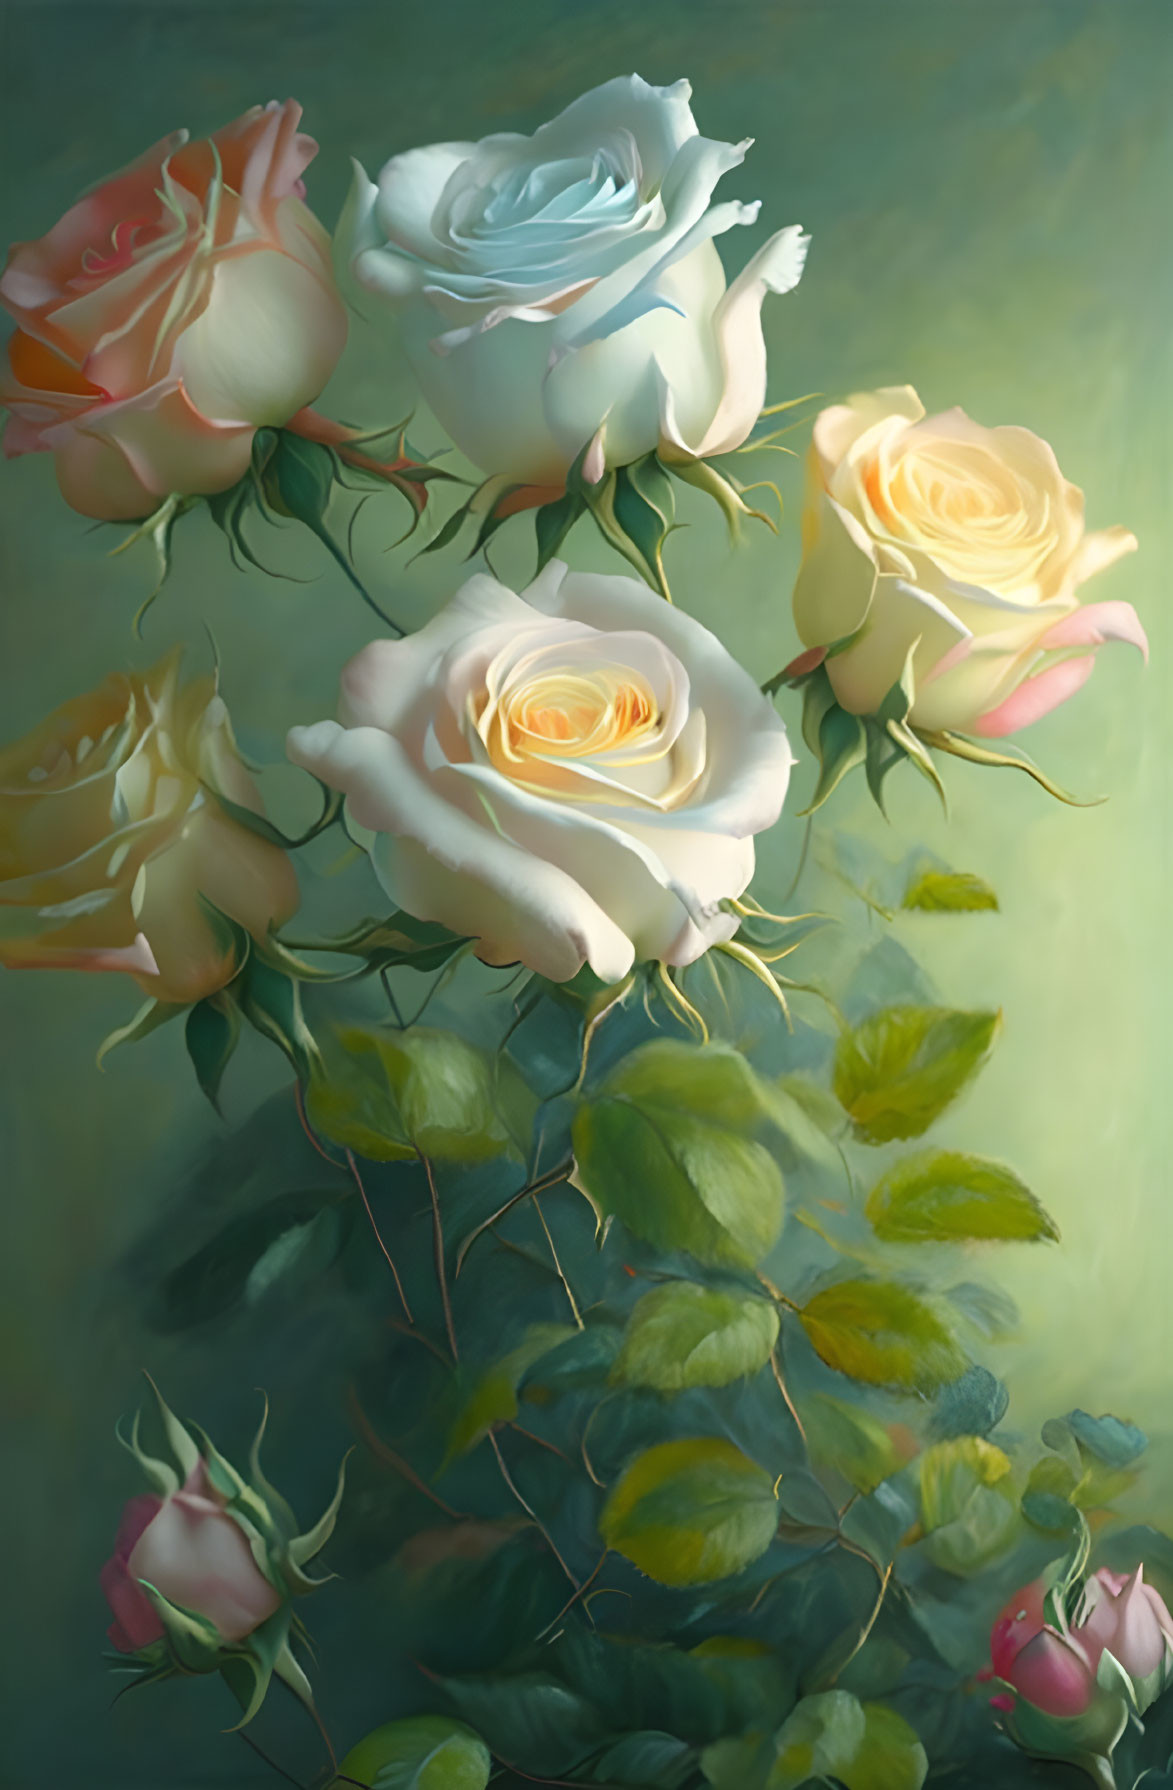 Pastel bouquet painting with roses in cream, peach, and light blue